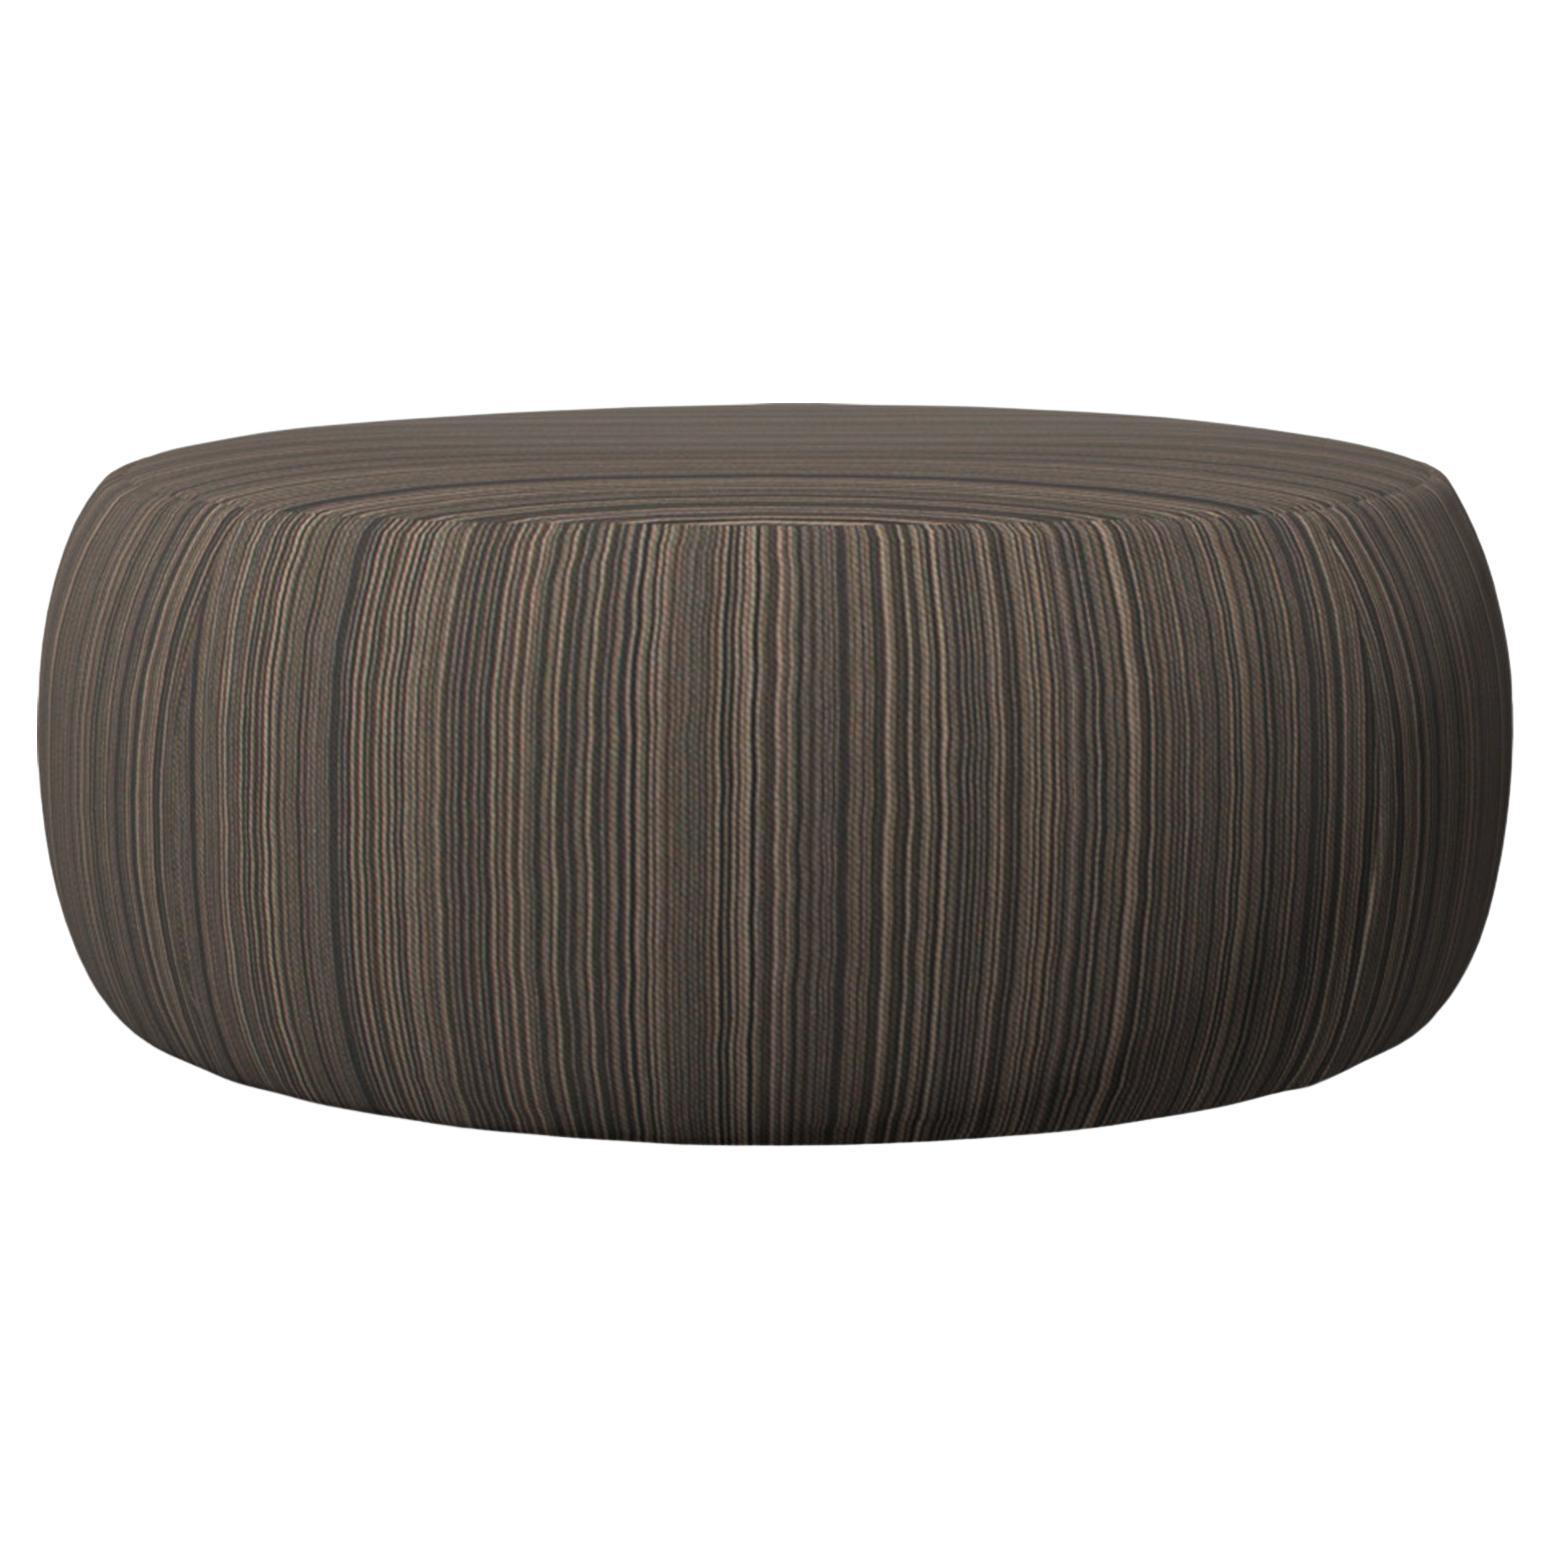 Moooi Pooof Large Pouf in Manga, Green Upholstery For Sale